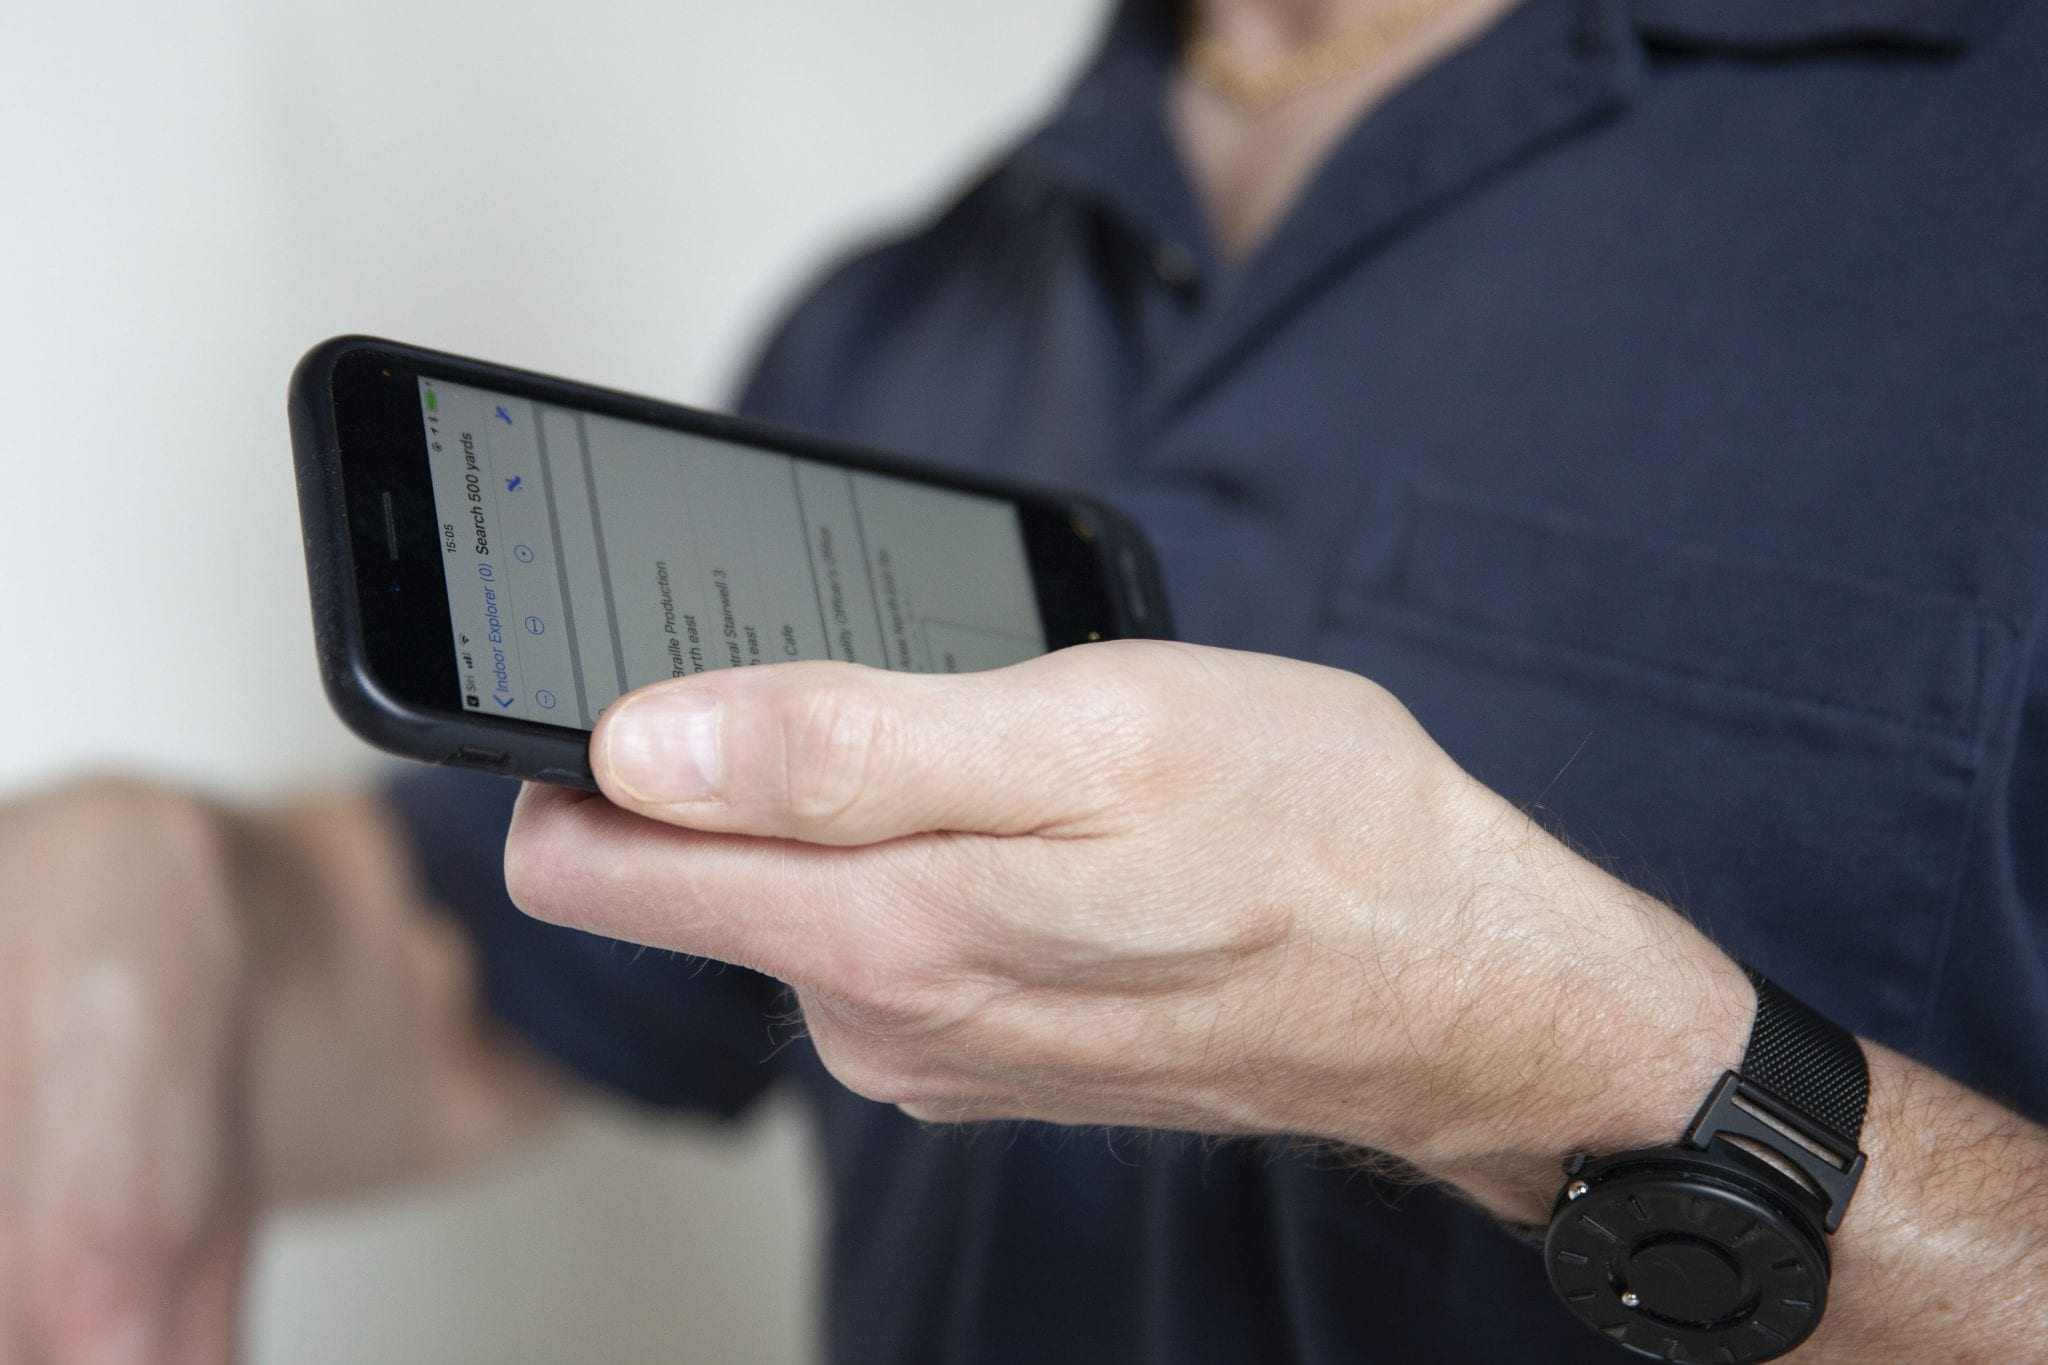 A man’s hand holding an iPhone which is displaying the Indoor Explorer search screen.